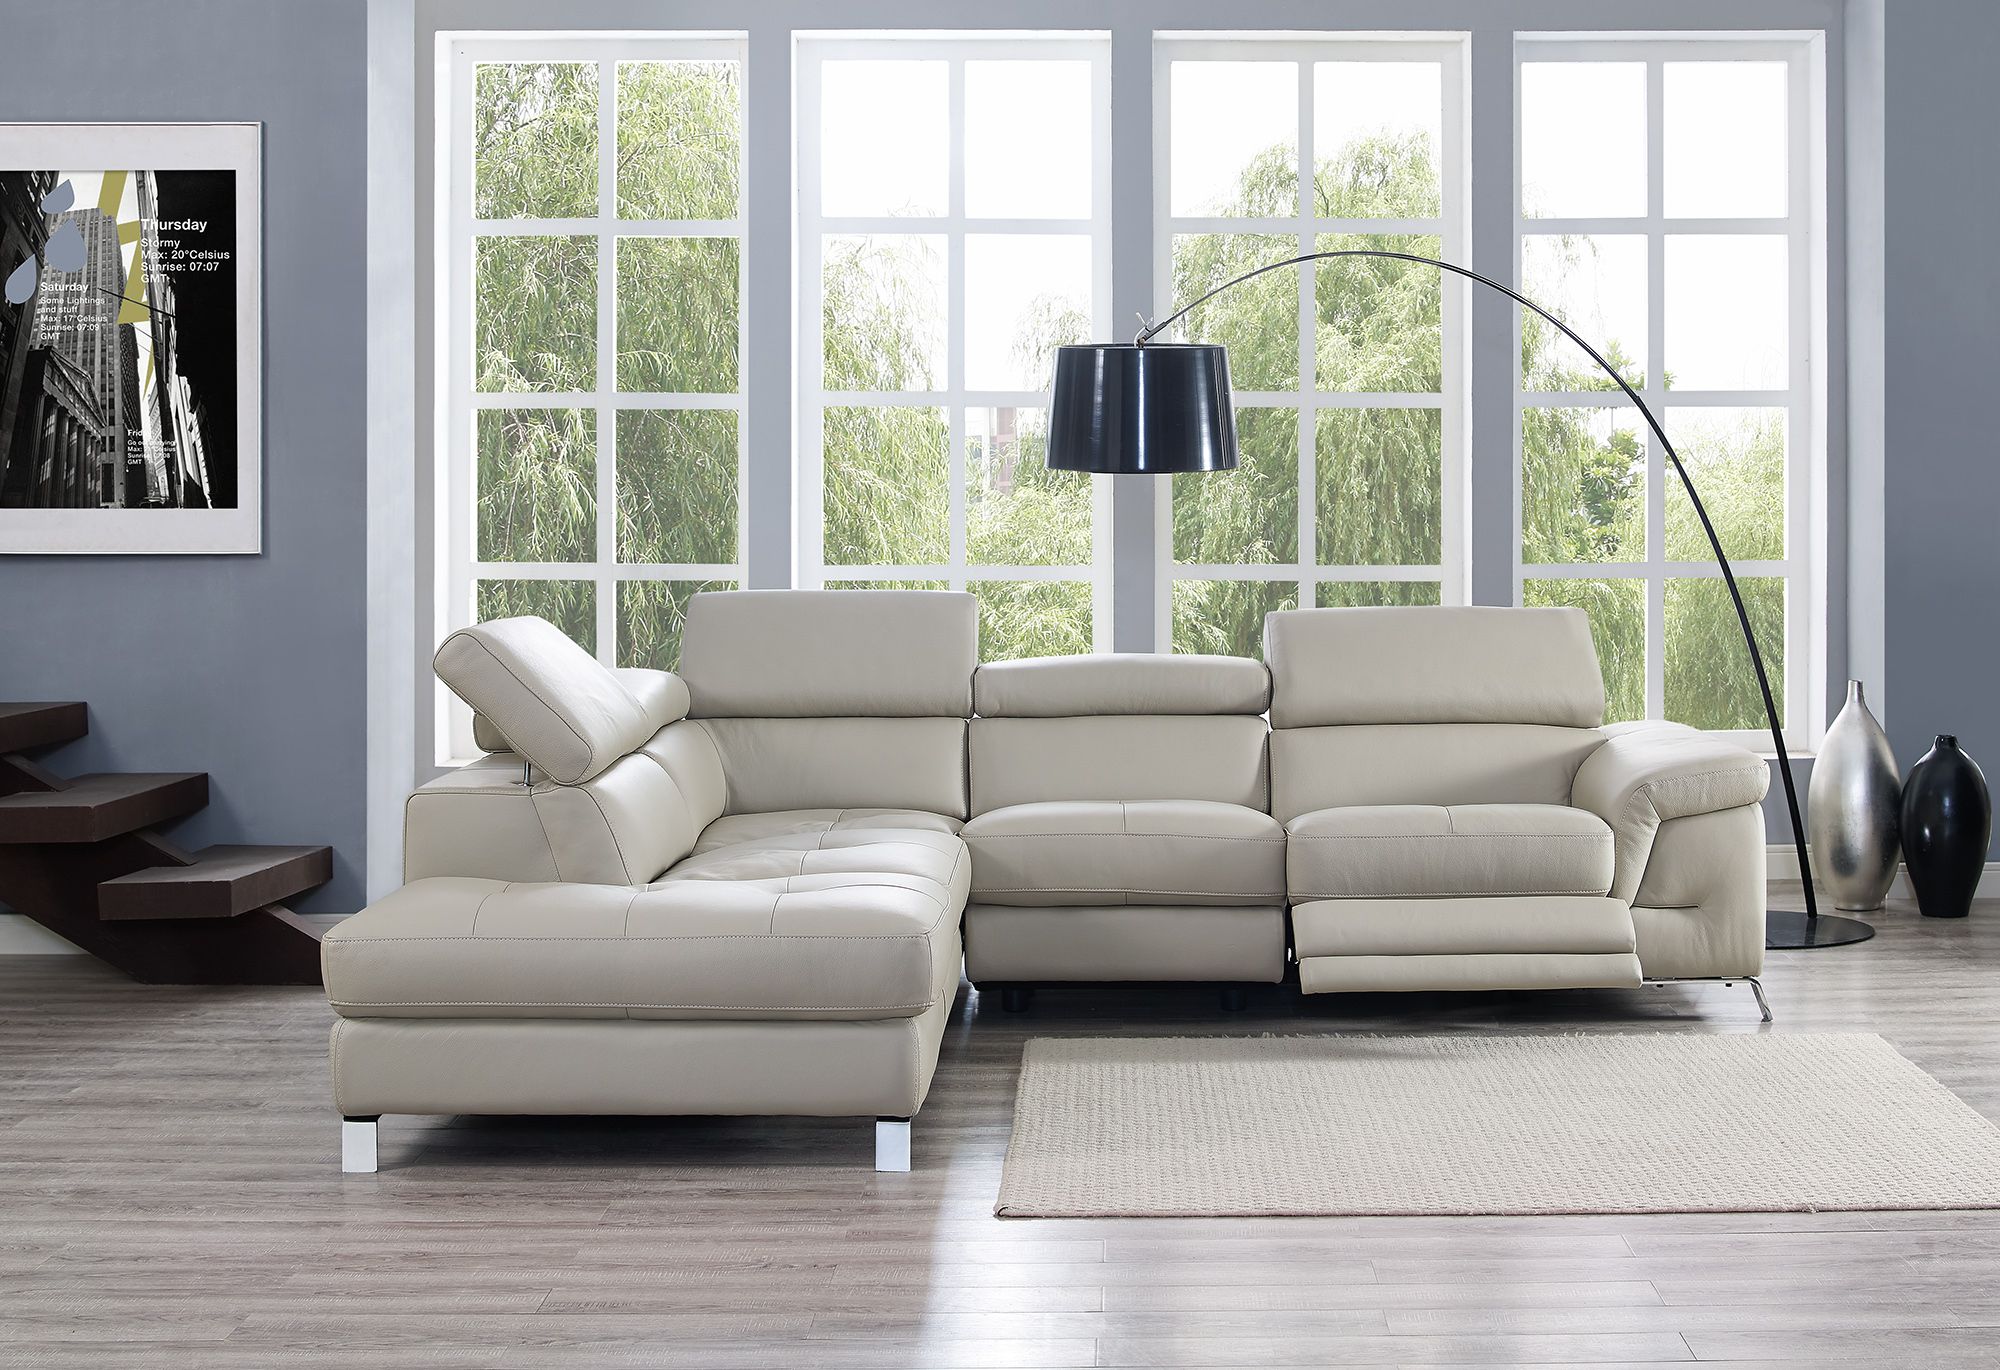 Elegant Furniture Italian Leather Upholstery Modesto In Elegant Sofas And Chairs (View 8 of 15)